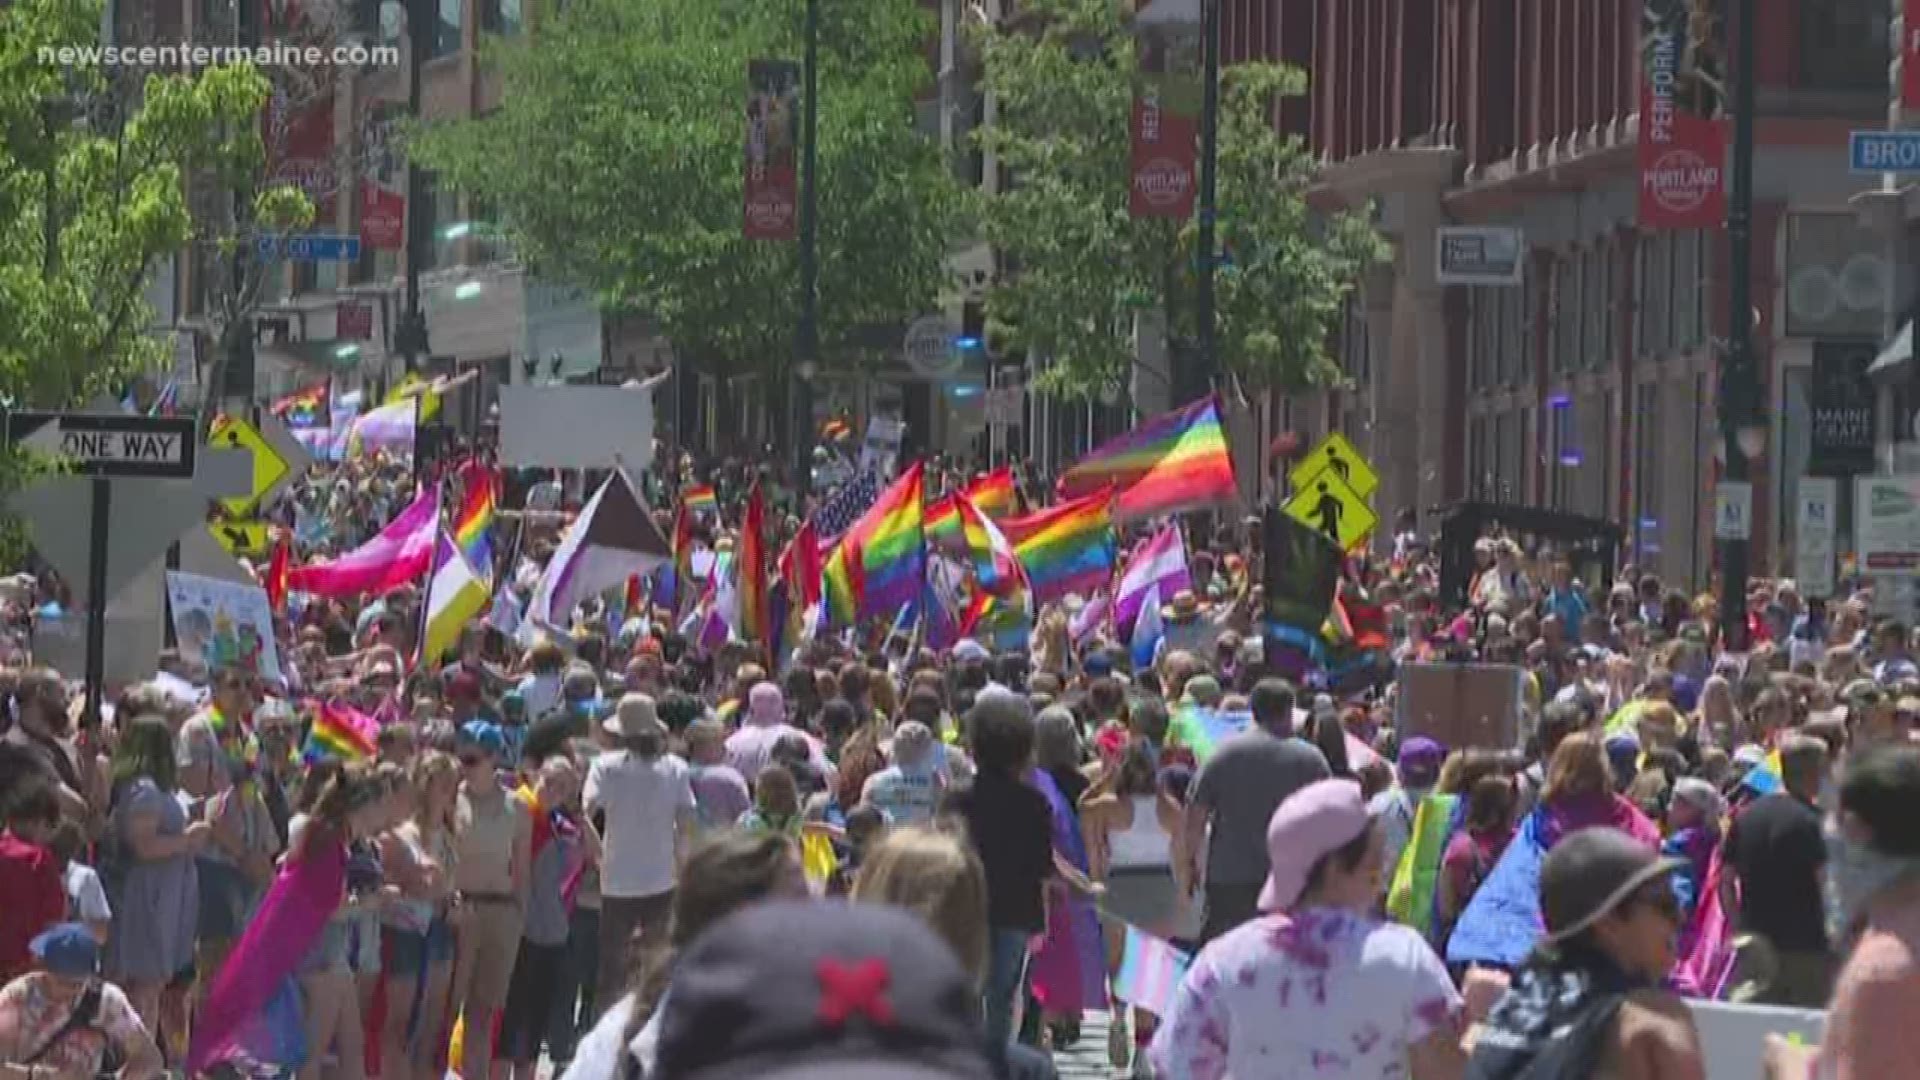 People flooded the streets of Portland to spread messages of love and hope.